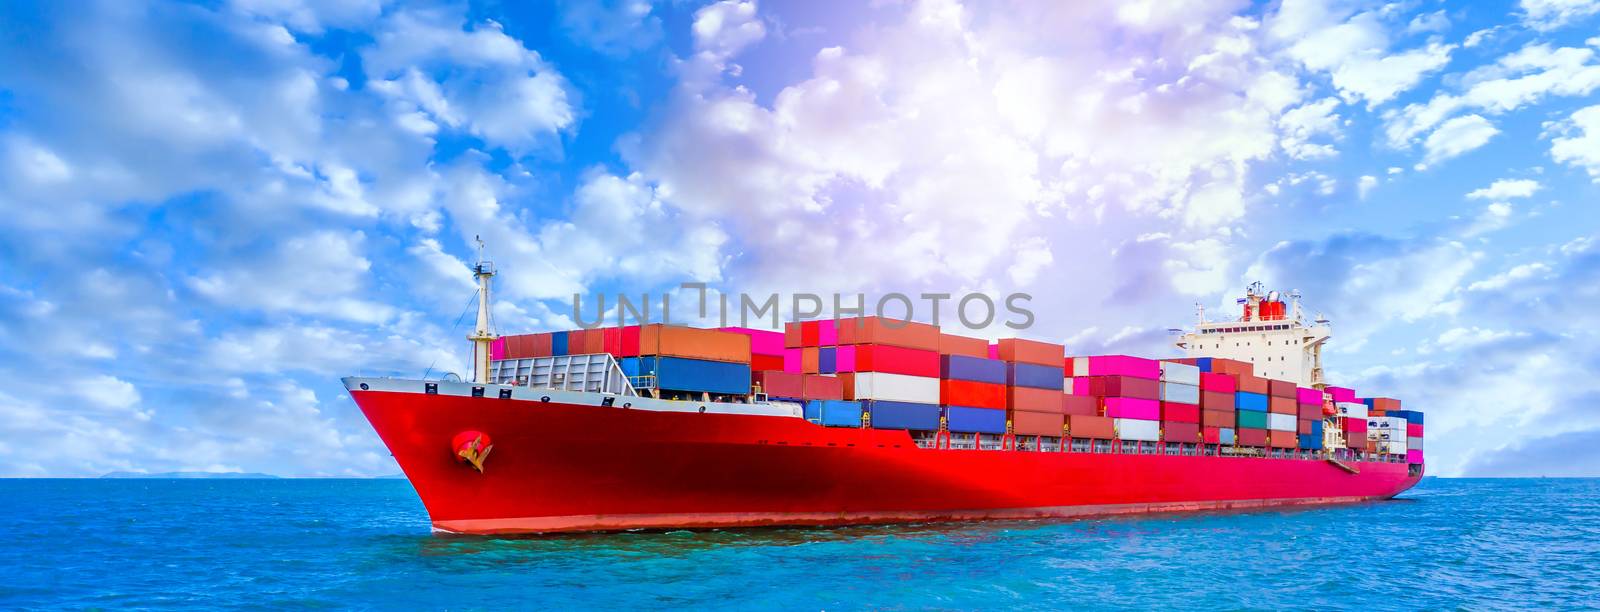 Container cargo ship, Freight shipping maritime vessel, Global b by AvigatoR